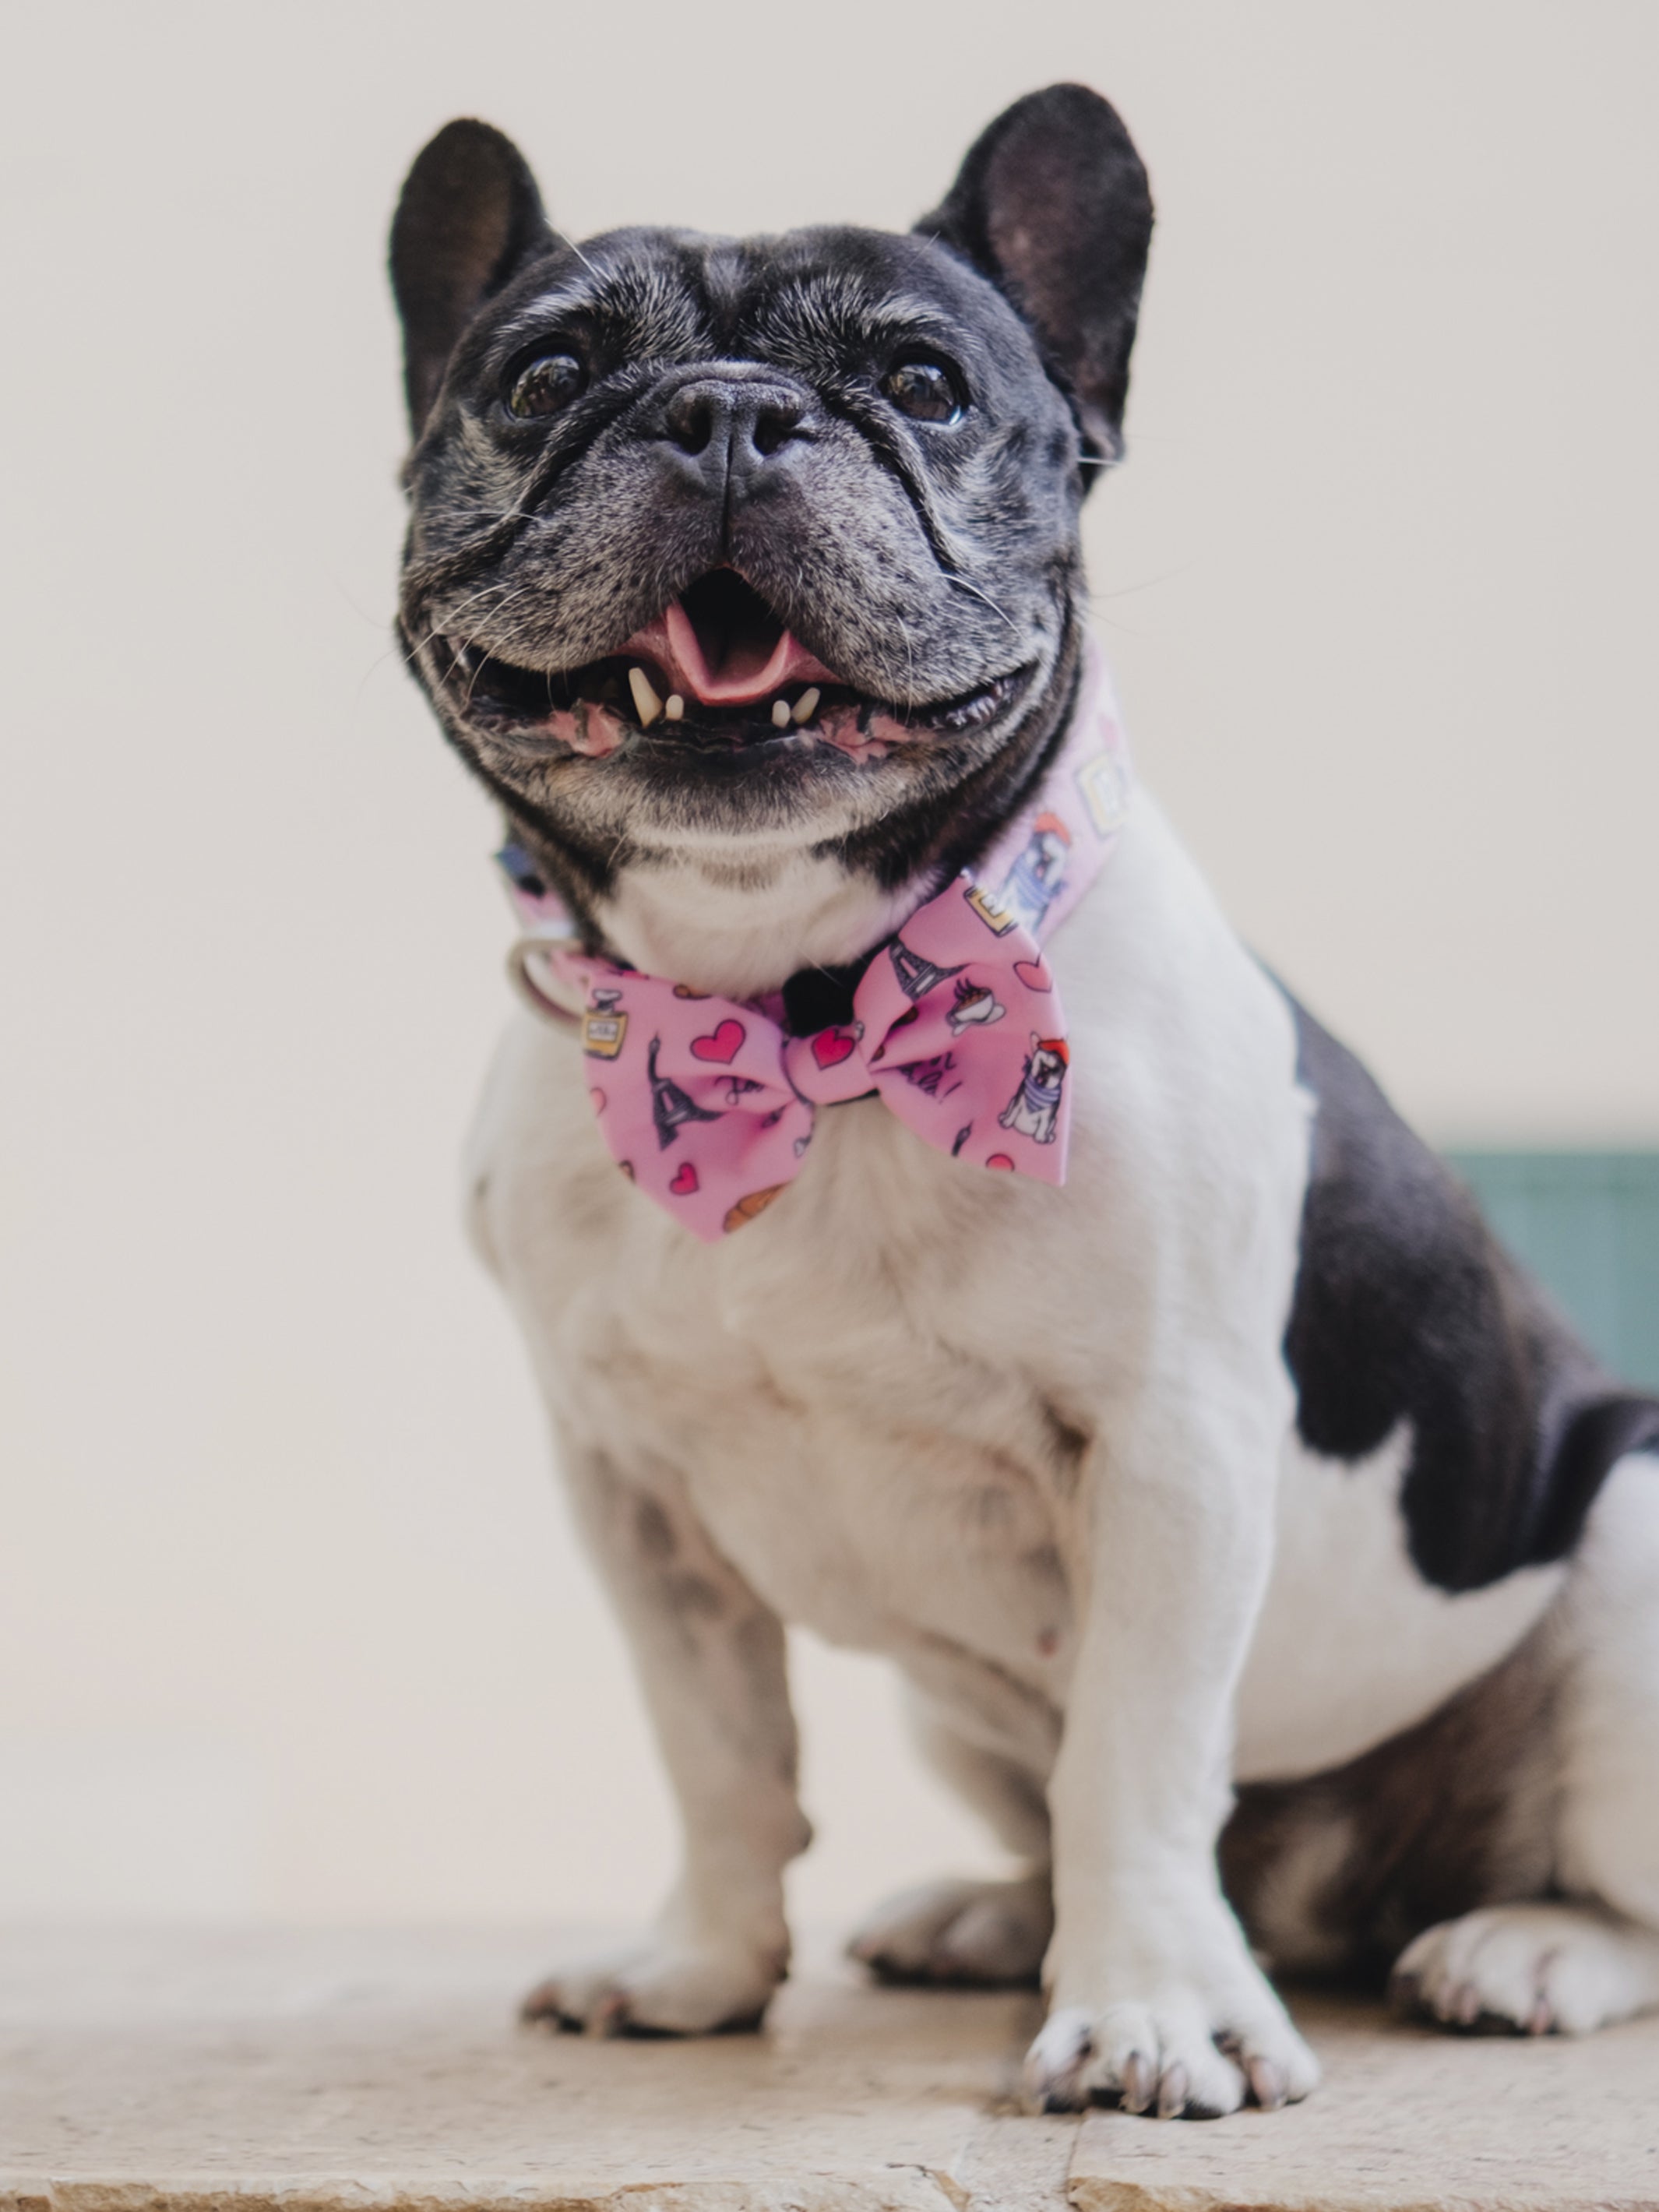 PARIS BOW TIE FOR DOGS